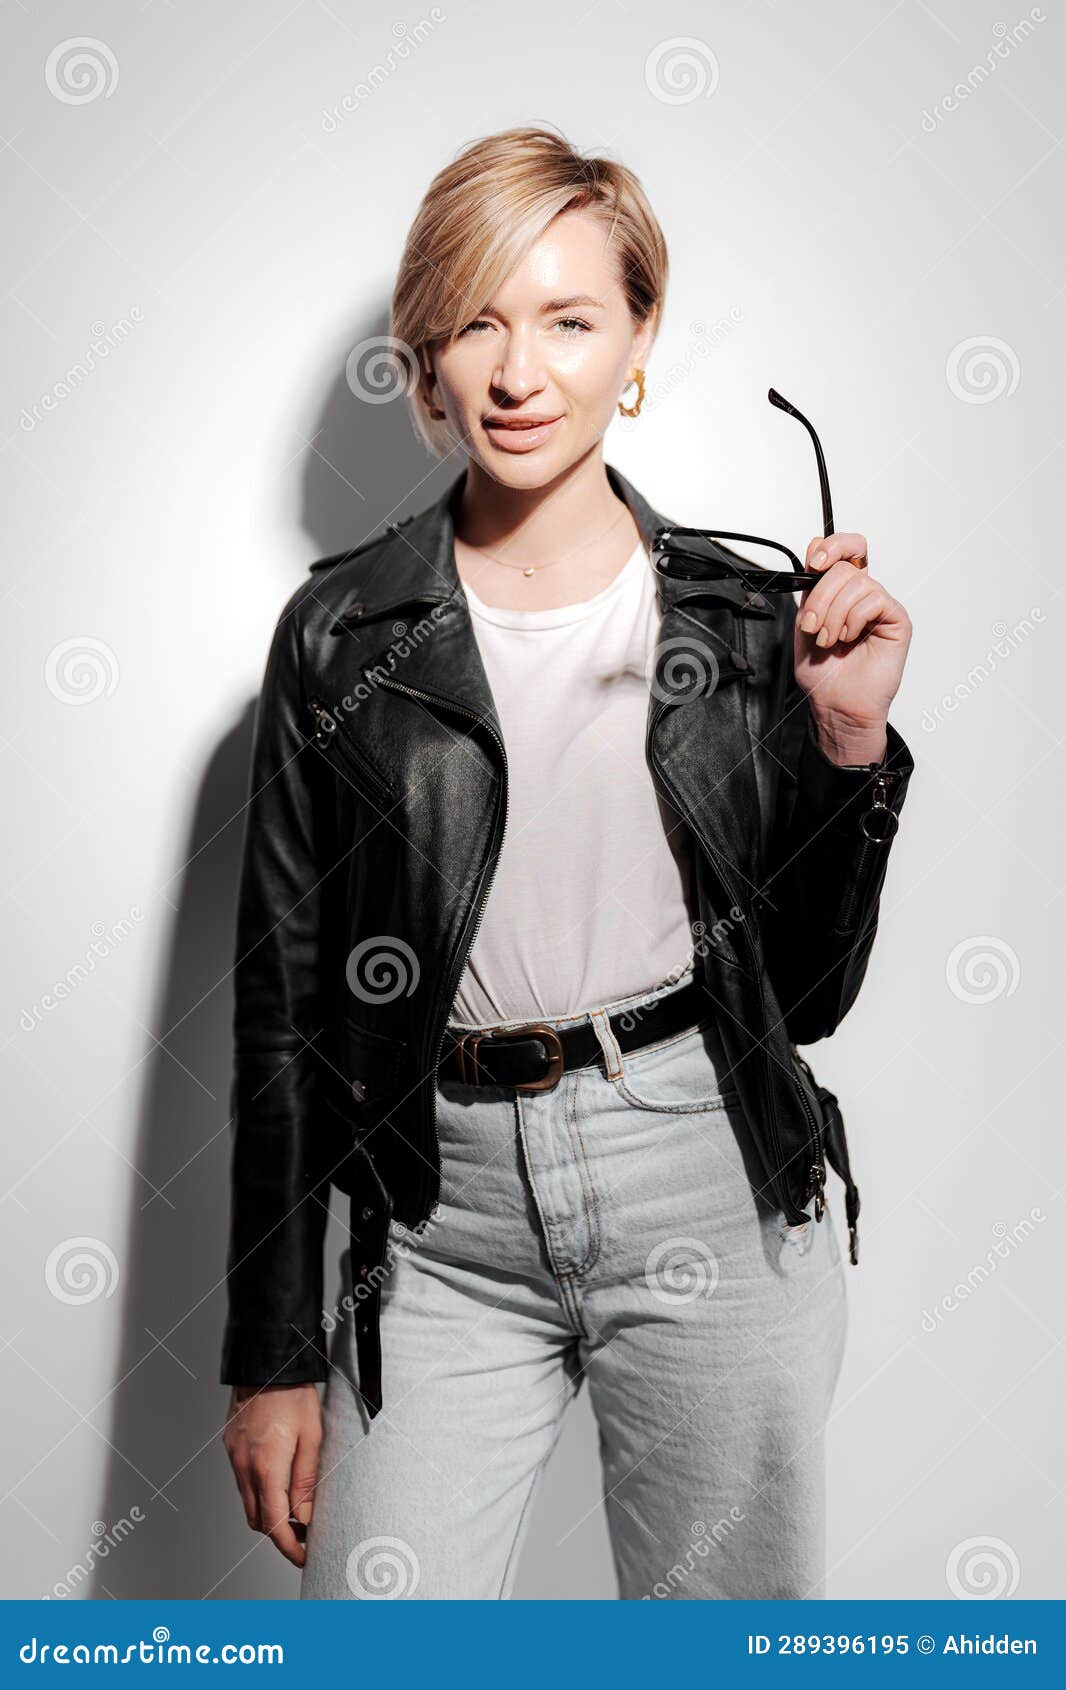 Stylish and Confident Young Woman in Black Leather Jacket Stock Image ...